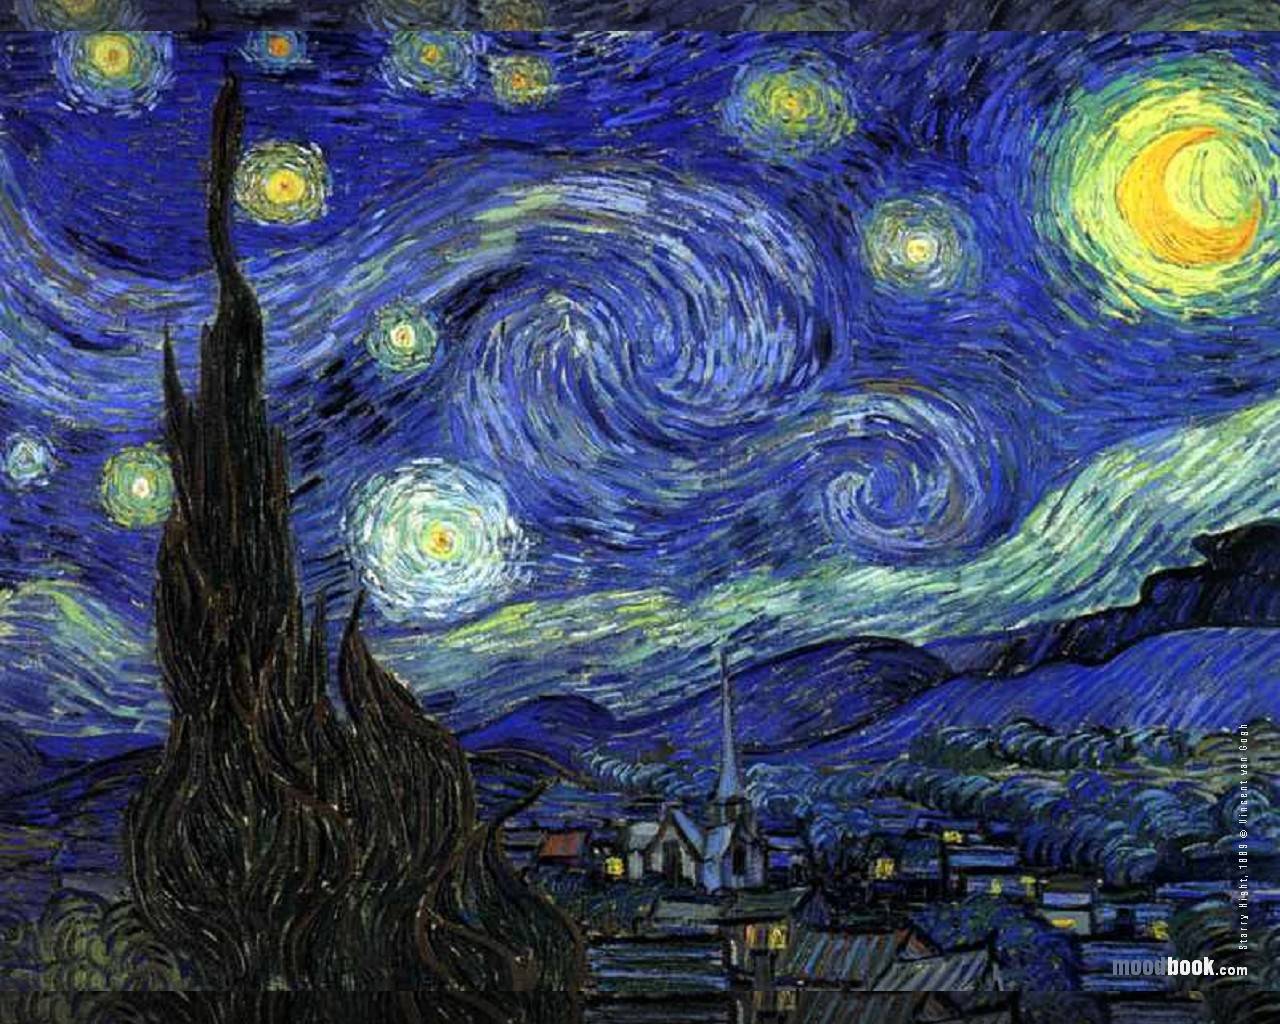 The Starry Night by Vincent van Gogh - ARTWORKS (Illustrations ...